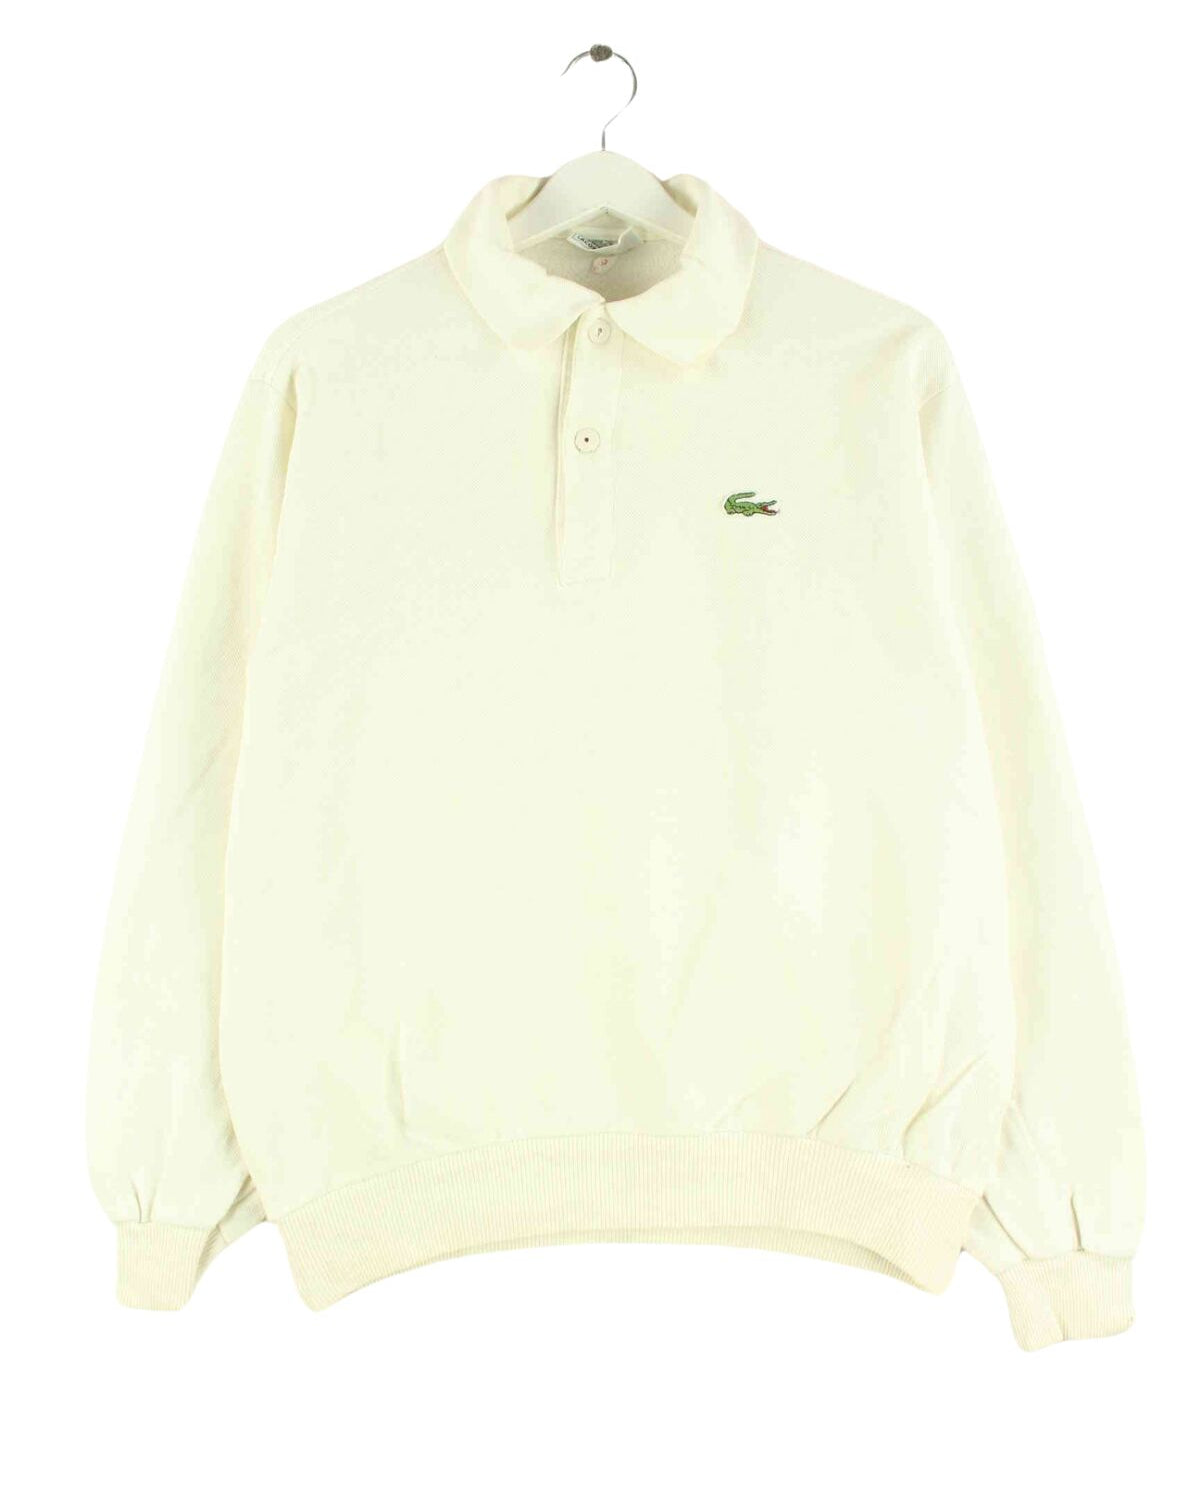 Lacoste 90s Vintage Polo Sweater Beige M (front image)